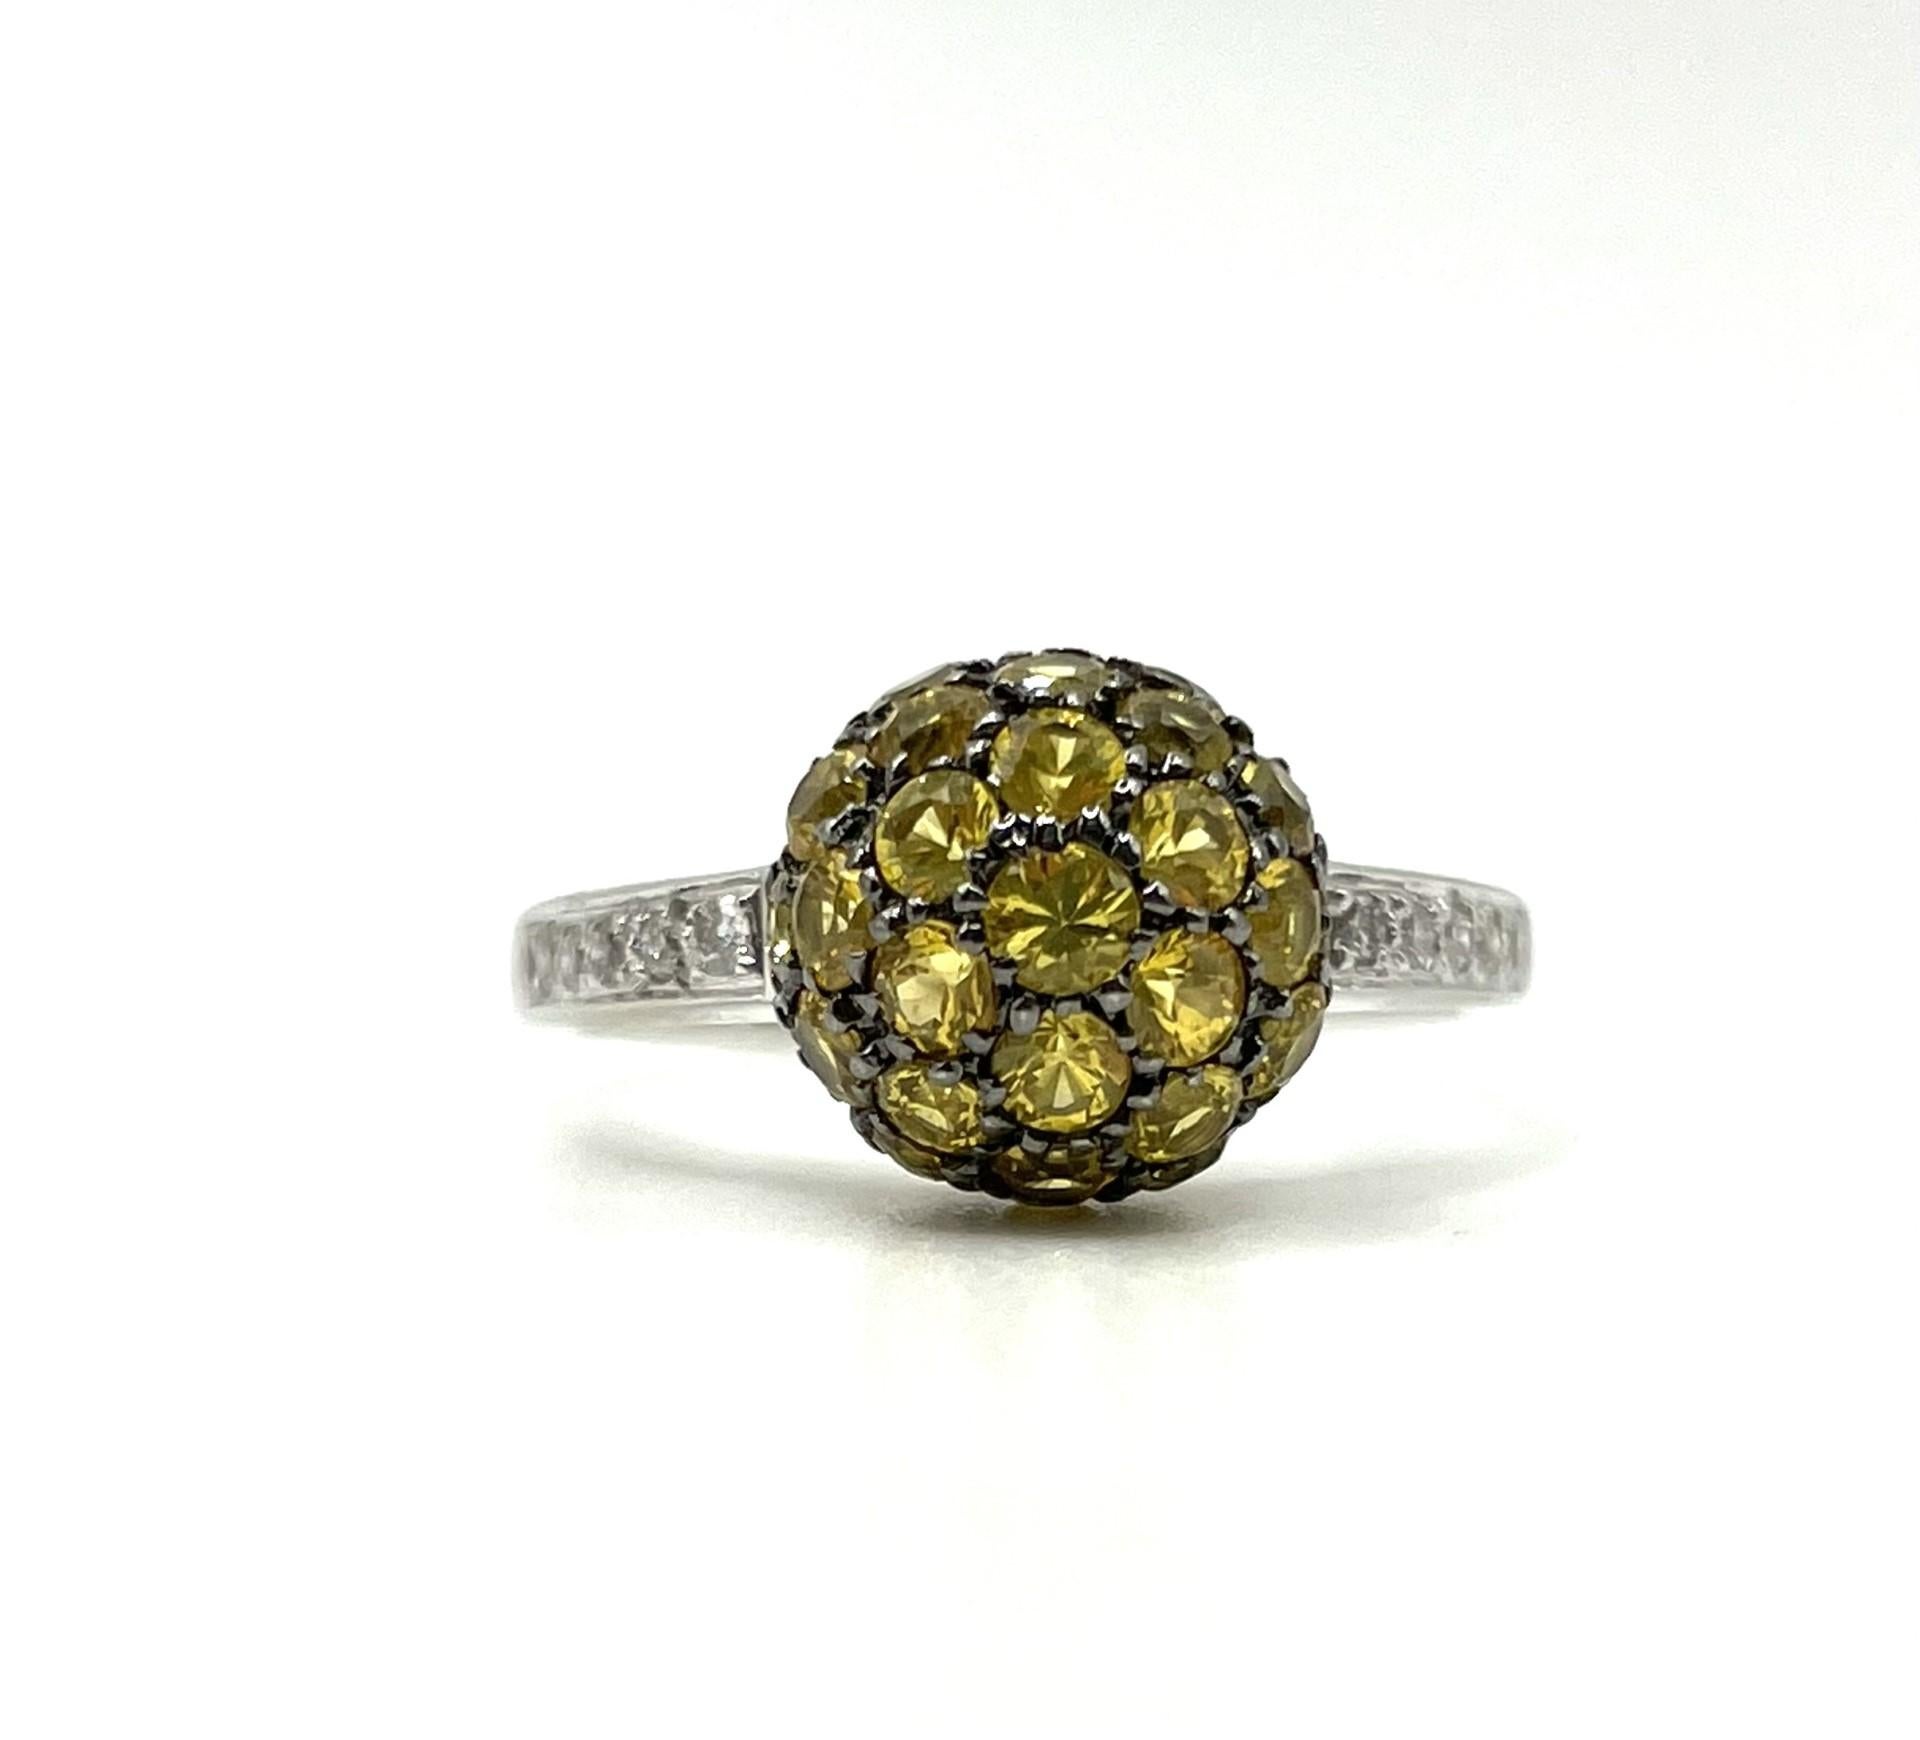 One 18kt white gold, natural yellow sapphire and diamond ball ring with a black rhodium finish around the yellow sapphires.

35 natural yellow sapphires 1.05ct total weight 

10 brilliant cut diamonds 0.20ct total weight

18kt white gold 4.2 grams